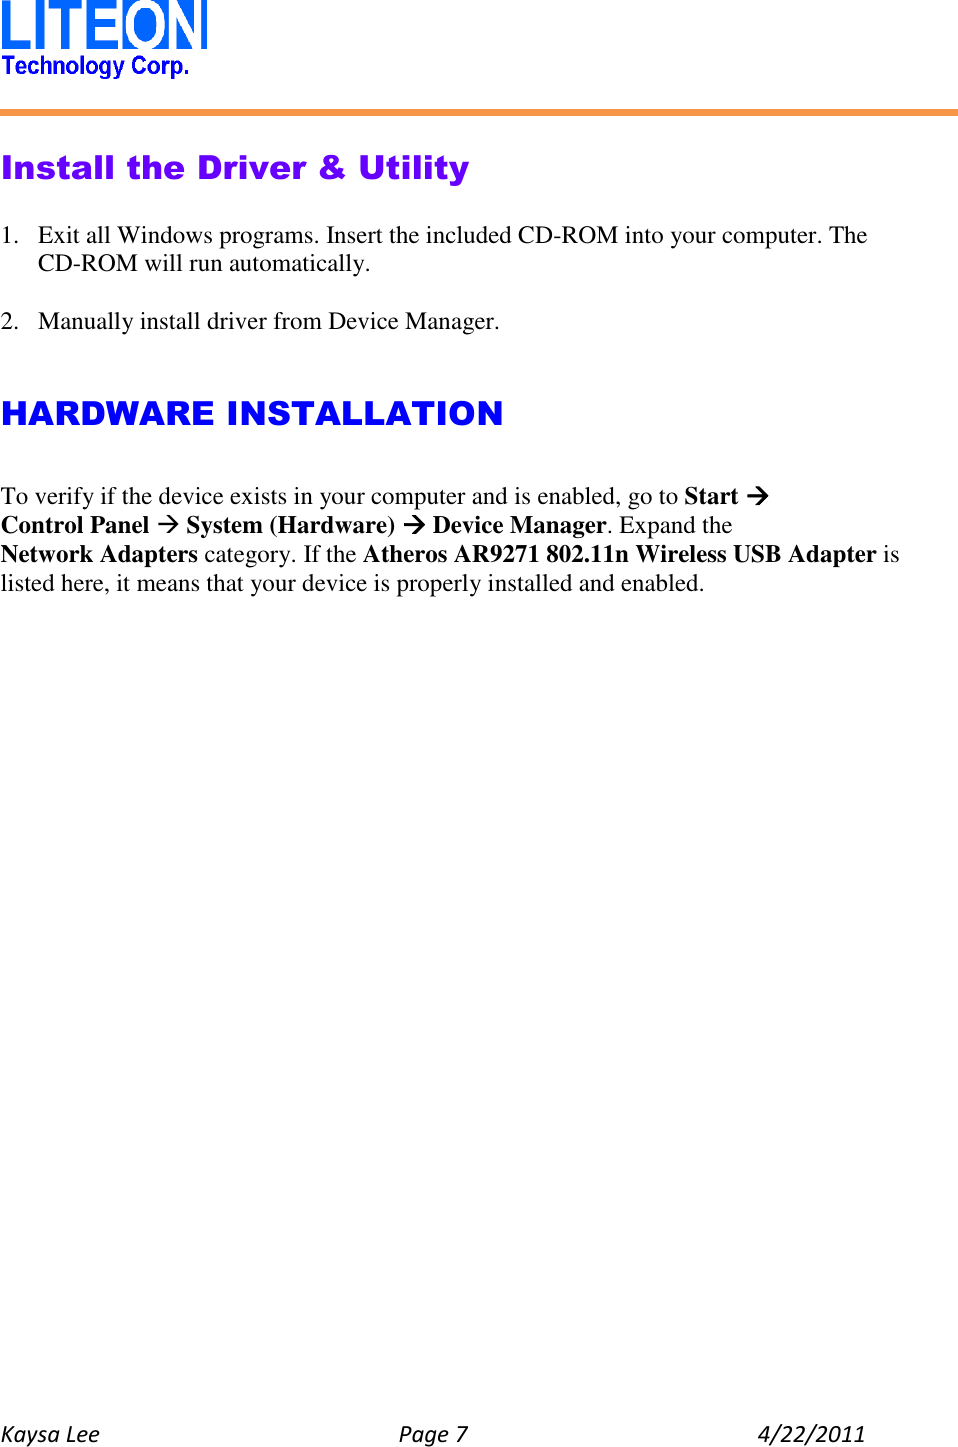   Kaysa Lee  Page 7  4/22/2011    Install the Driver &amp; Utility  1. Exit all Windows programs. Insert the included CD-ROM into your computer. The CD-ROM will run automatically.  2. Manually install driver from Device Manager.   HARDWARE INSTALLATION  To verify if the device exists in your computer and is enabled, go to Start  Control Panel  System (Hardware)  Device Manager. Expand the Network Adapters category. If the Atheros AR9271 802.11n Wireless USB Adapter is listed here, it means that your device is properly installed and enabled.    